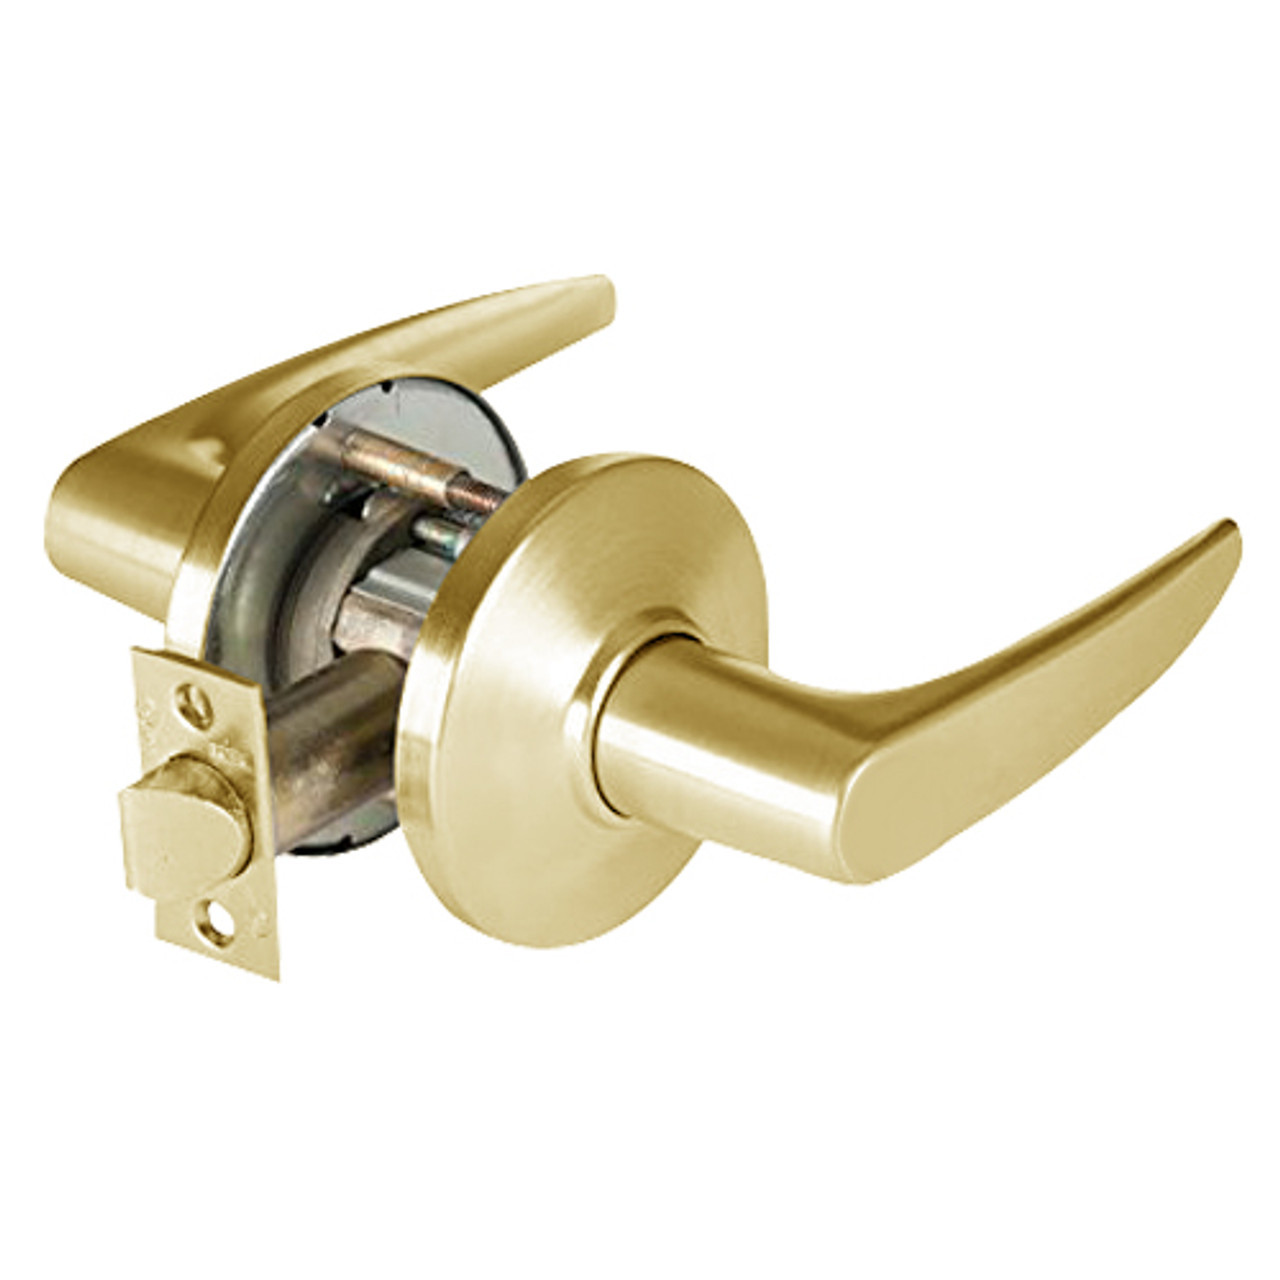 9K30N16DSTK605LM Best 9K Series Passage Heavy Duty Cylindrical Lever Locks with Curved Without Return Lever Design in Bright Brass